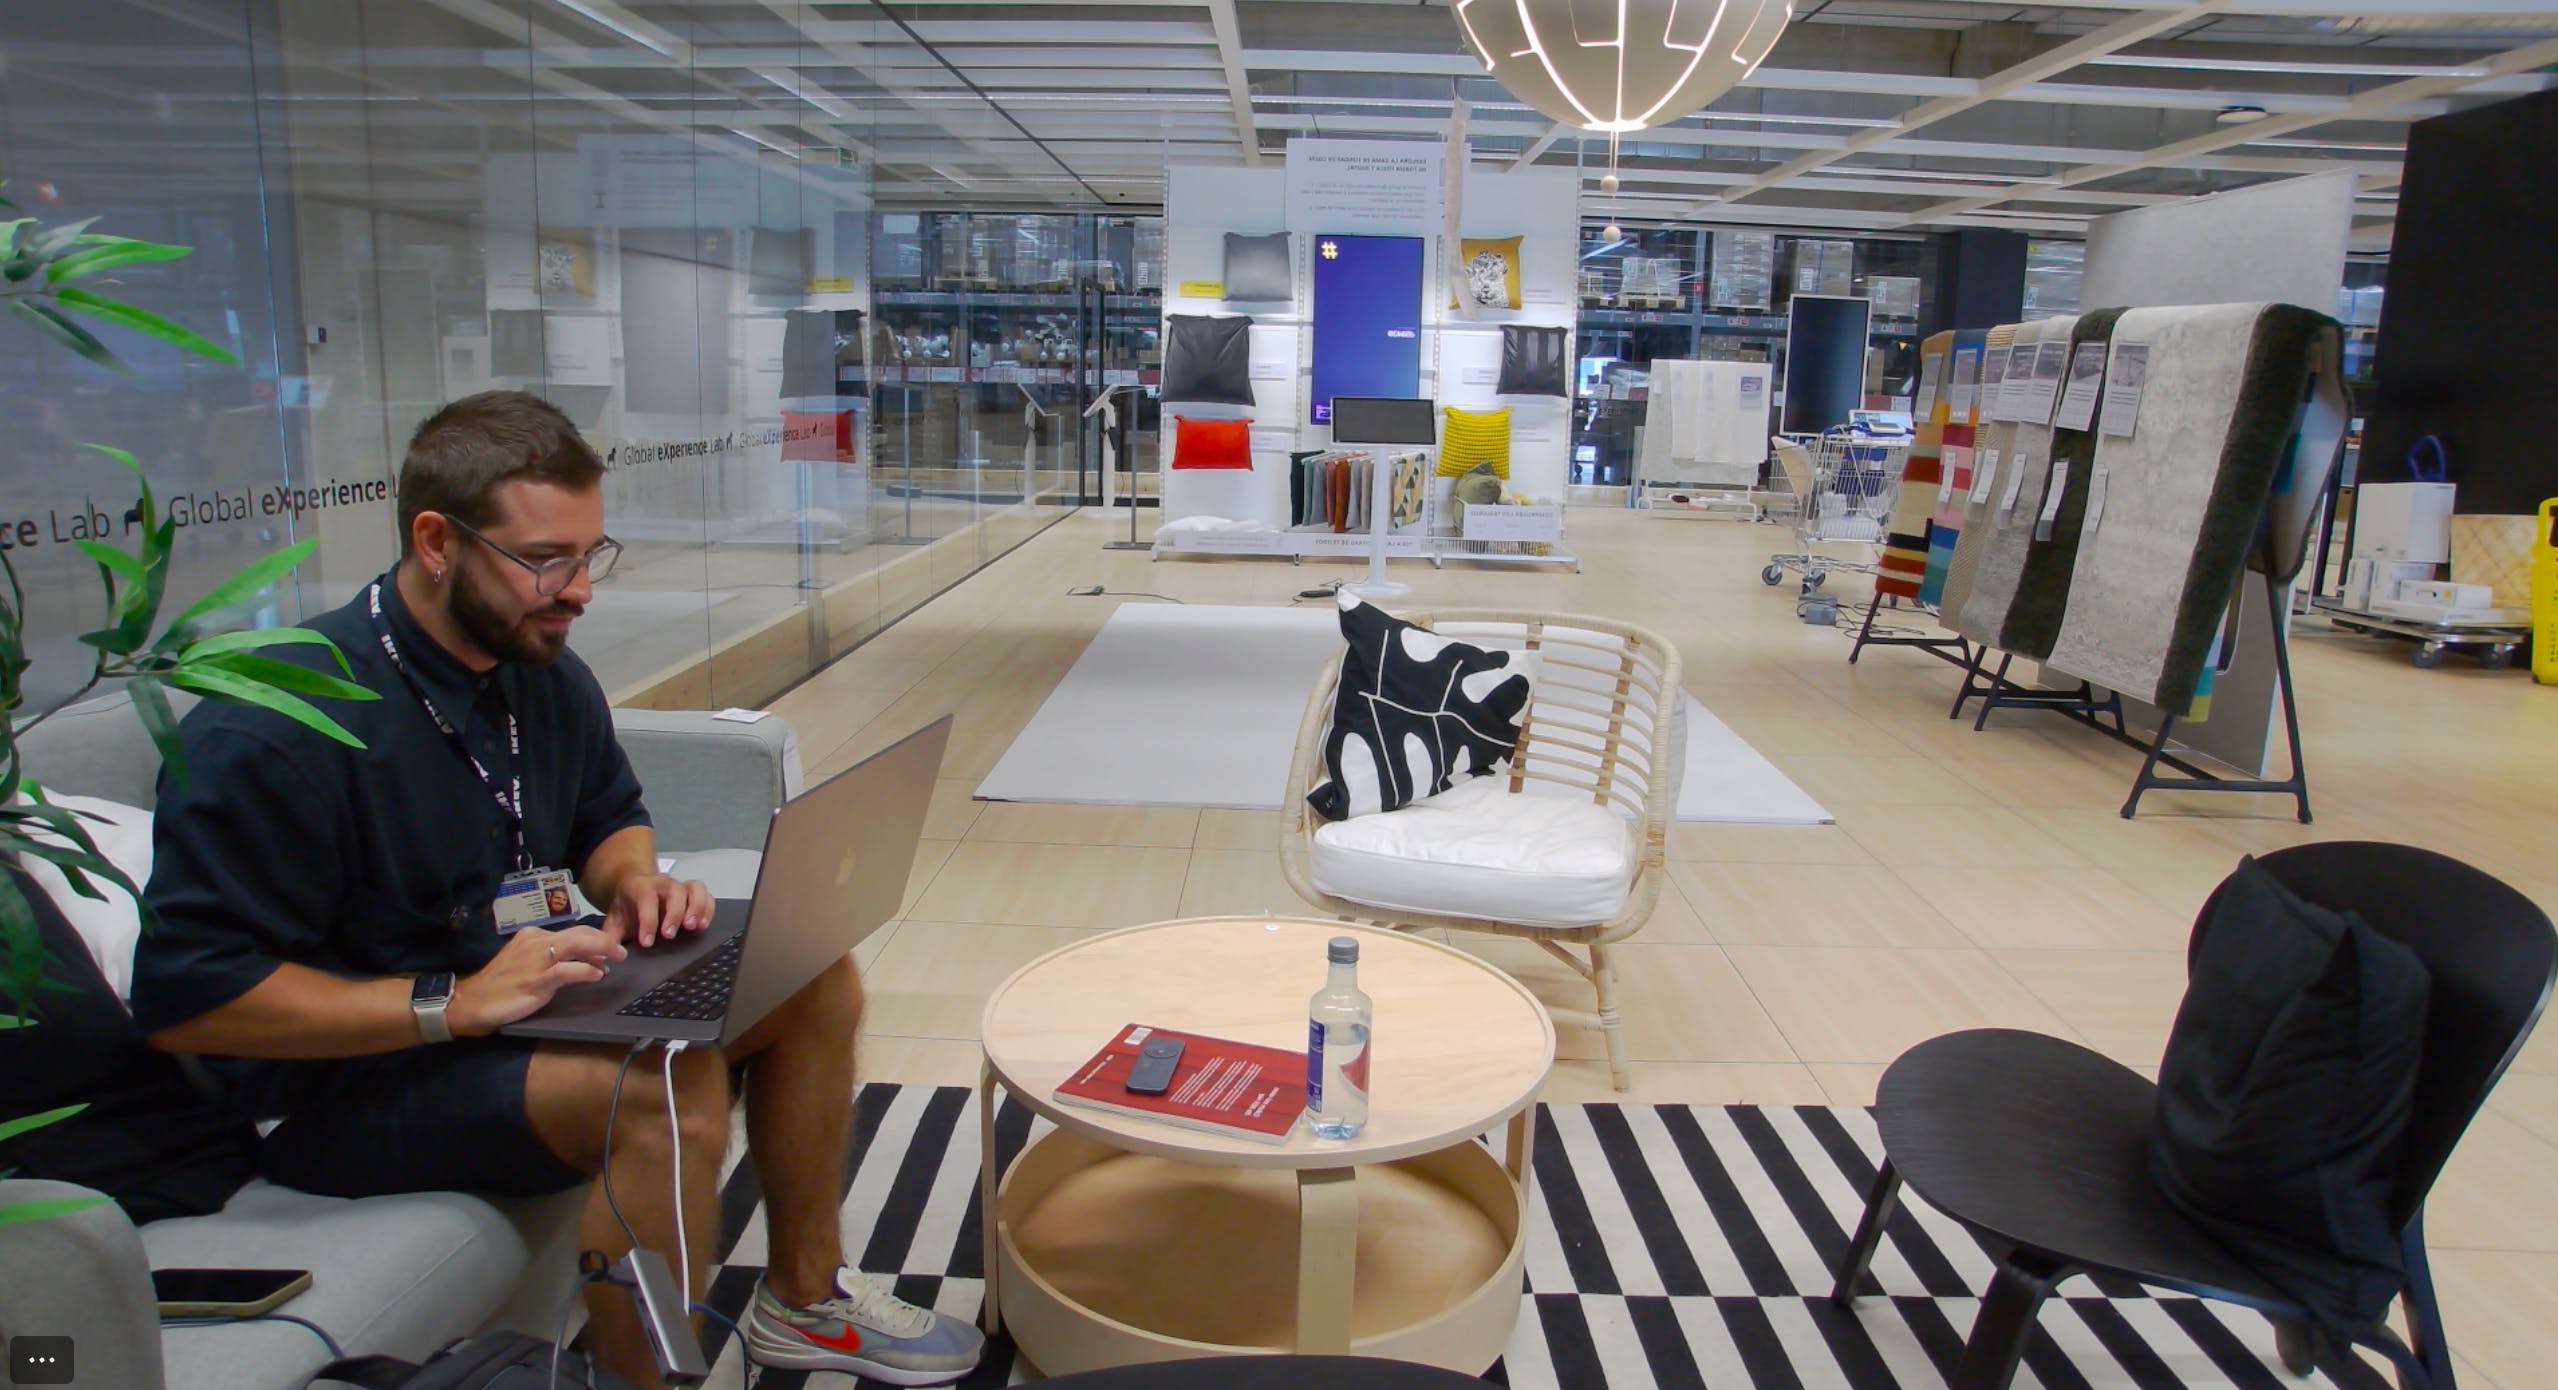 Juan Carlos Díez Rodríguez in the eXperience Lab at a Spanish IKEA store